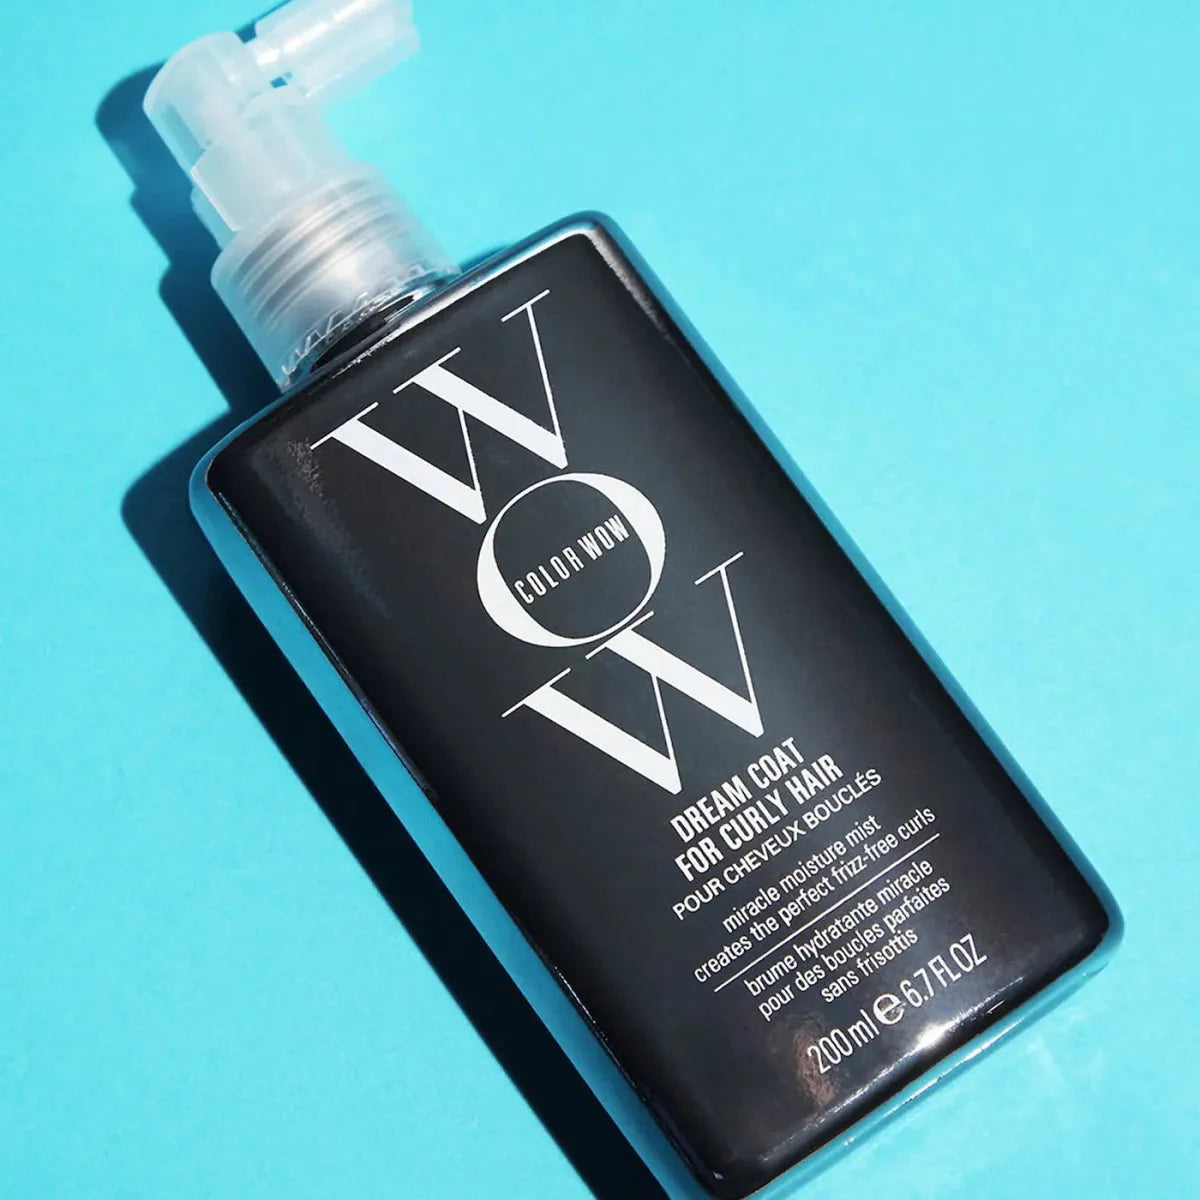 Color Wow | Dream Coat for Curly Hair 200ml - DG International Ventures Limited